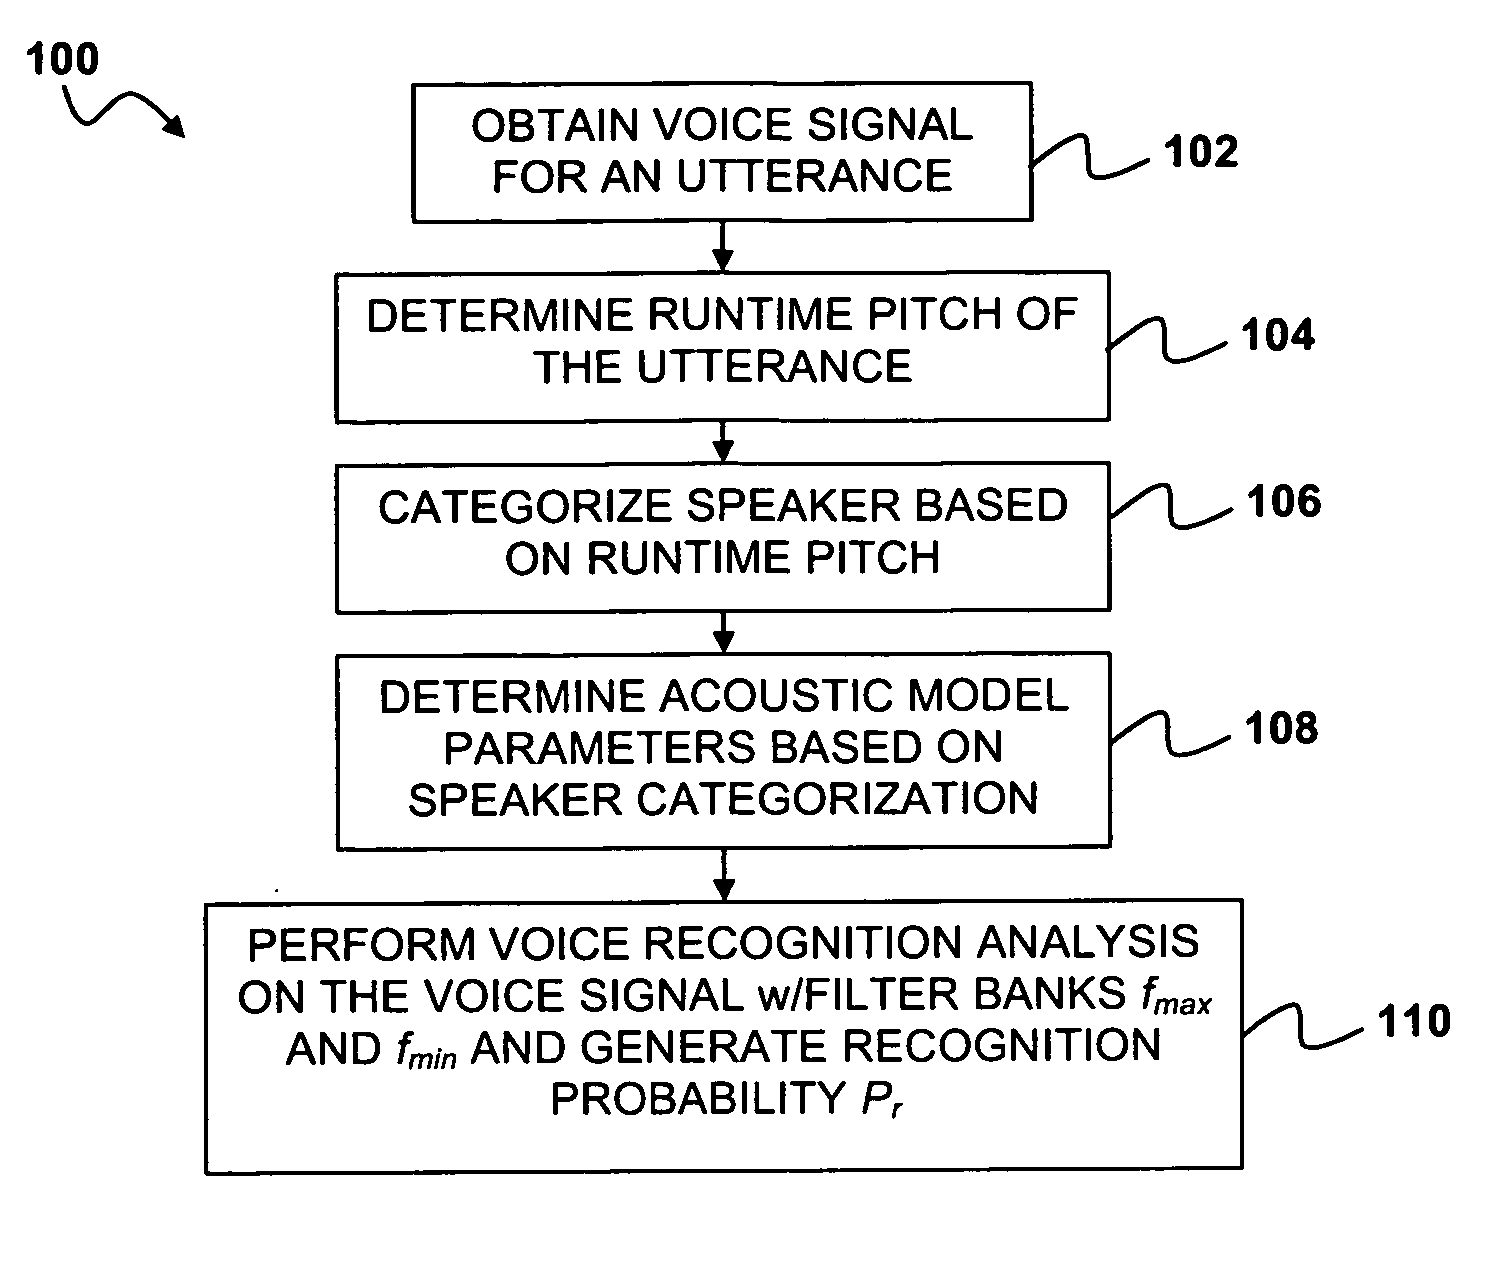 Voice recognition with speaker adaptation and registration with pitch